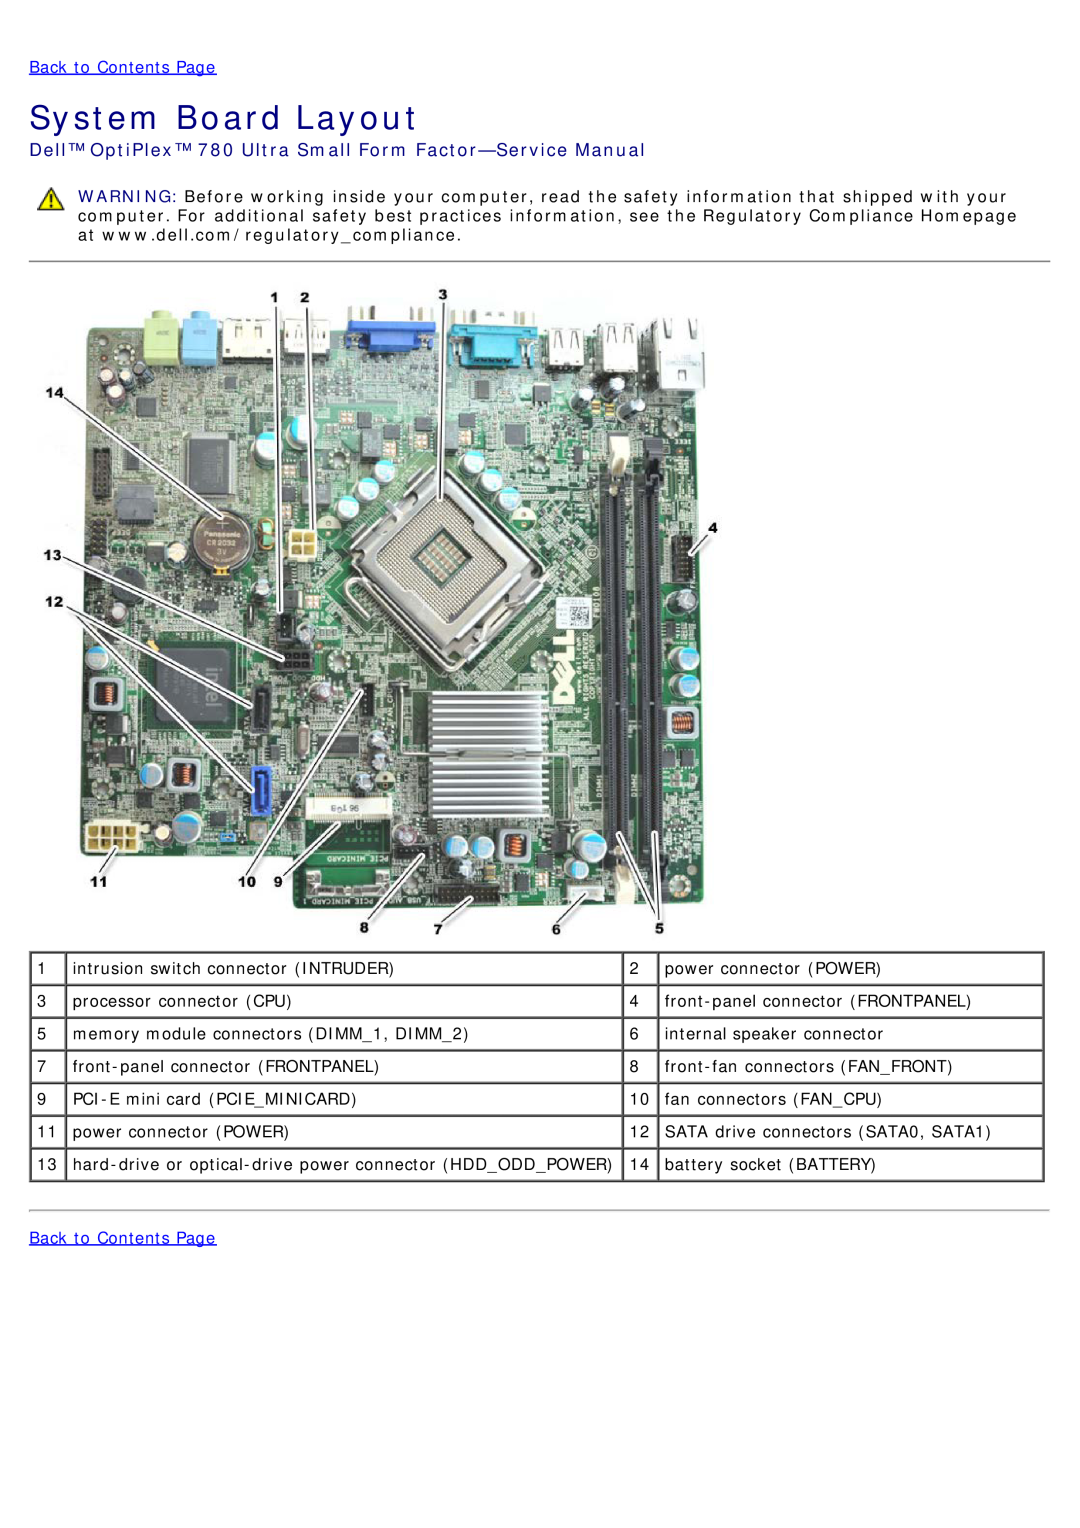 Dell service manual System Board Layout, Dell OptiPlex 780 Ultra Small Form Factor-Service Manual, Back to Contents Page 